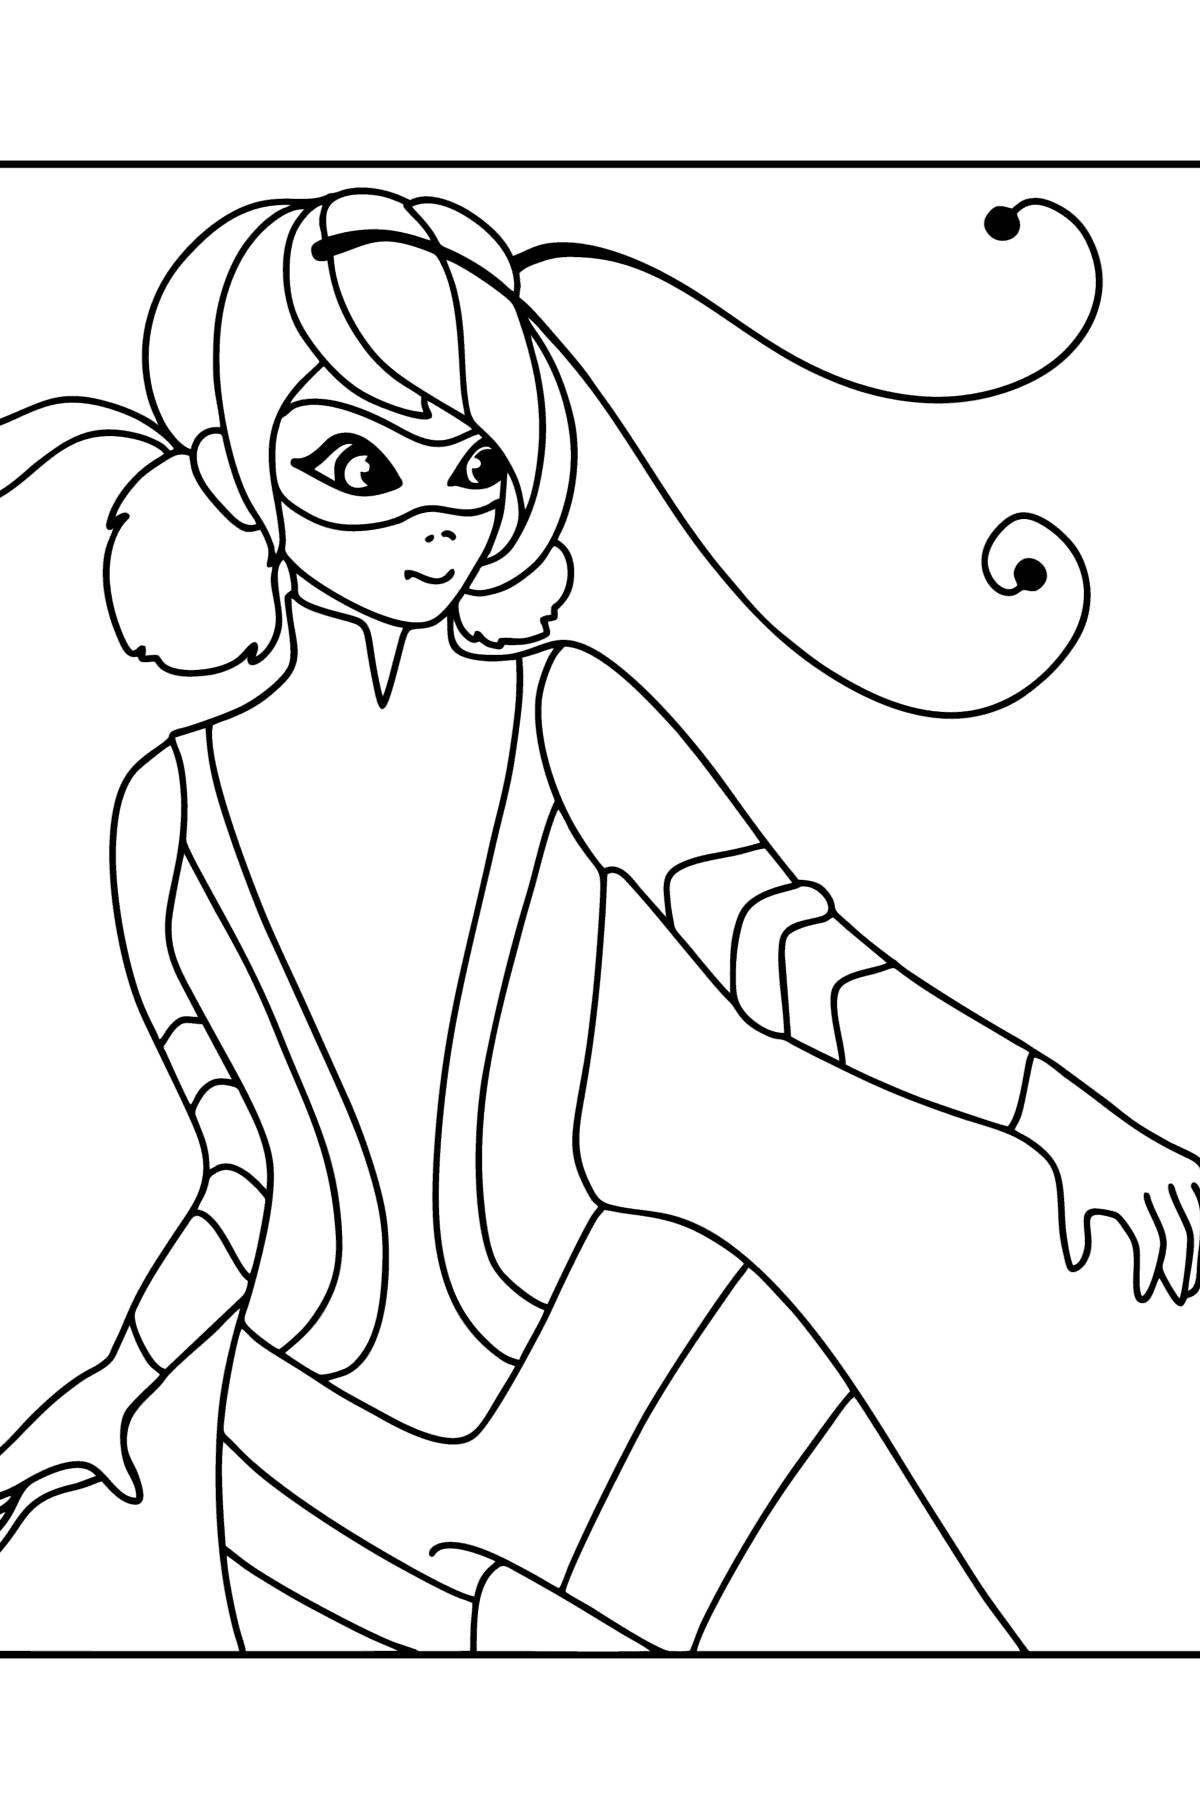 Coloring page festive lady bee